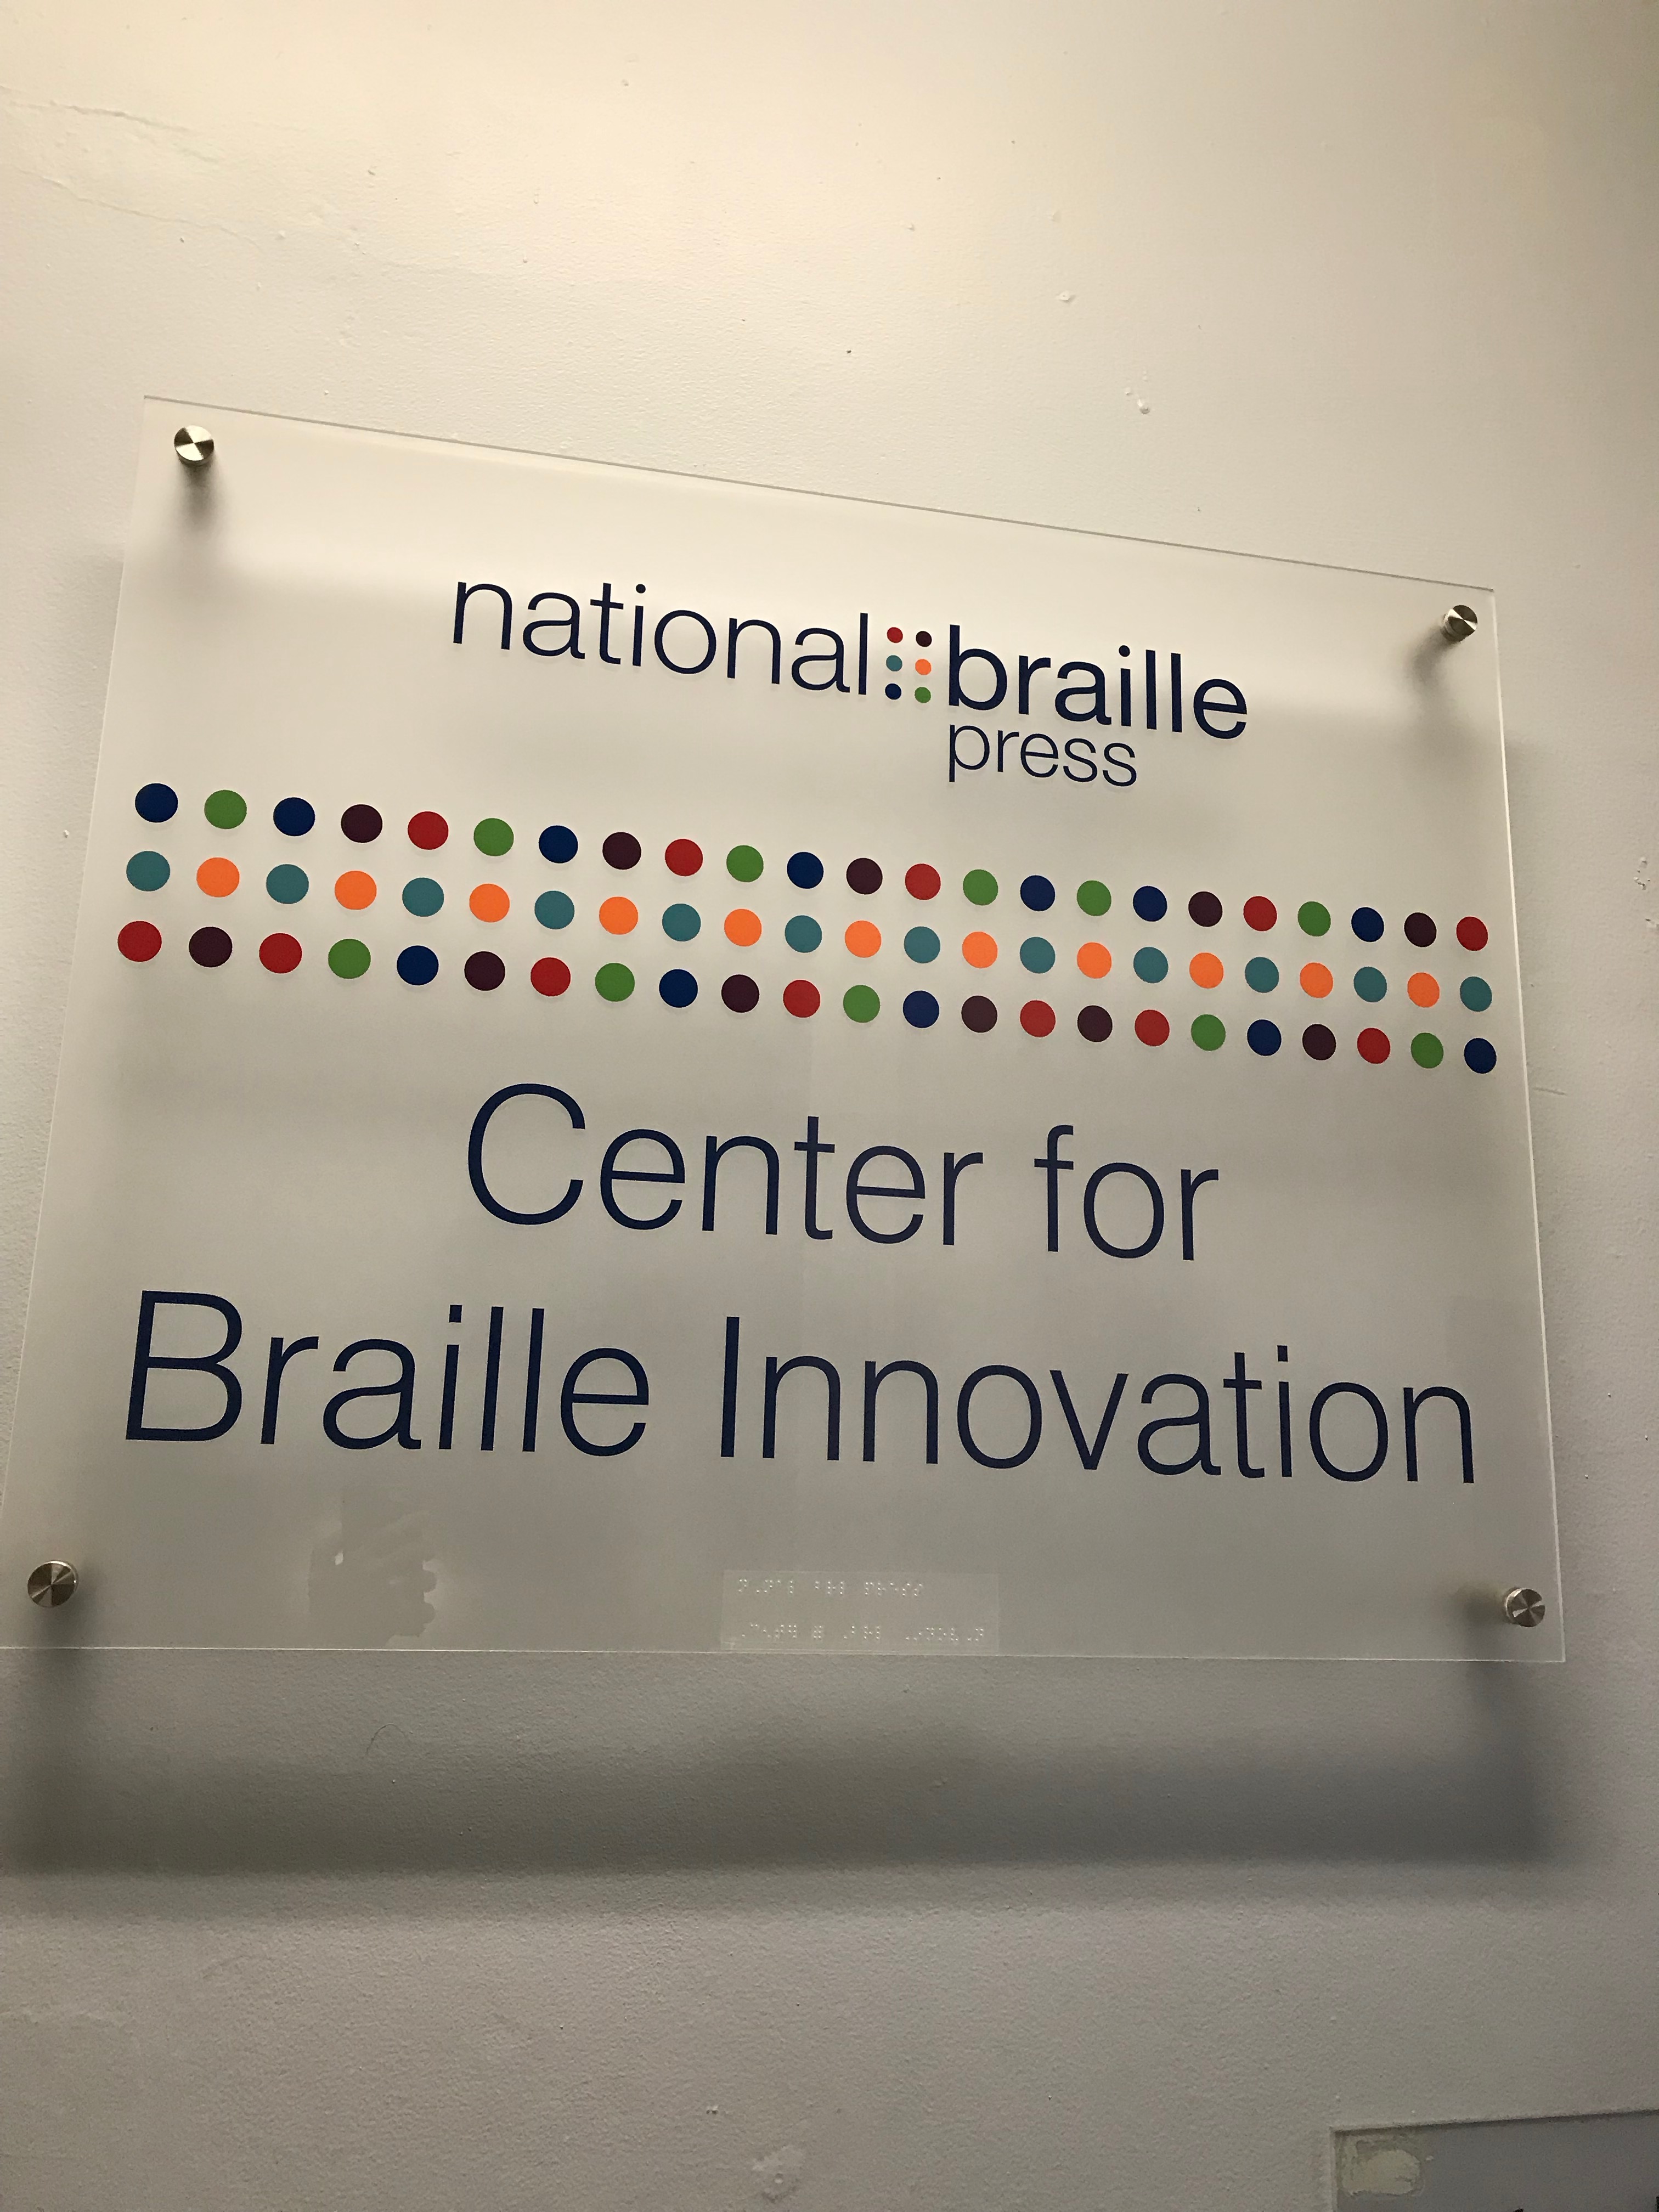 Photo of a sign that reads "National Braille Press - Center for Braille Innovation"